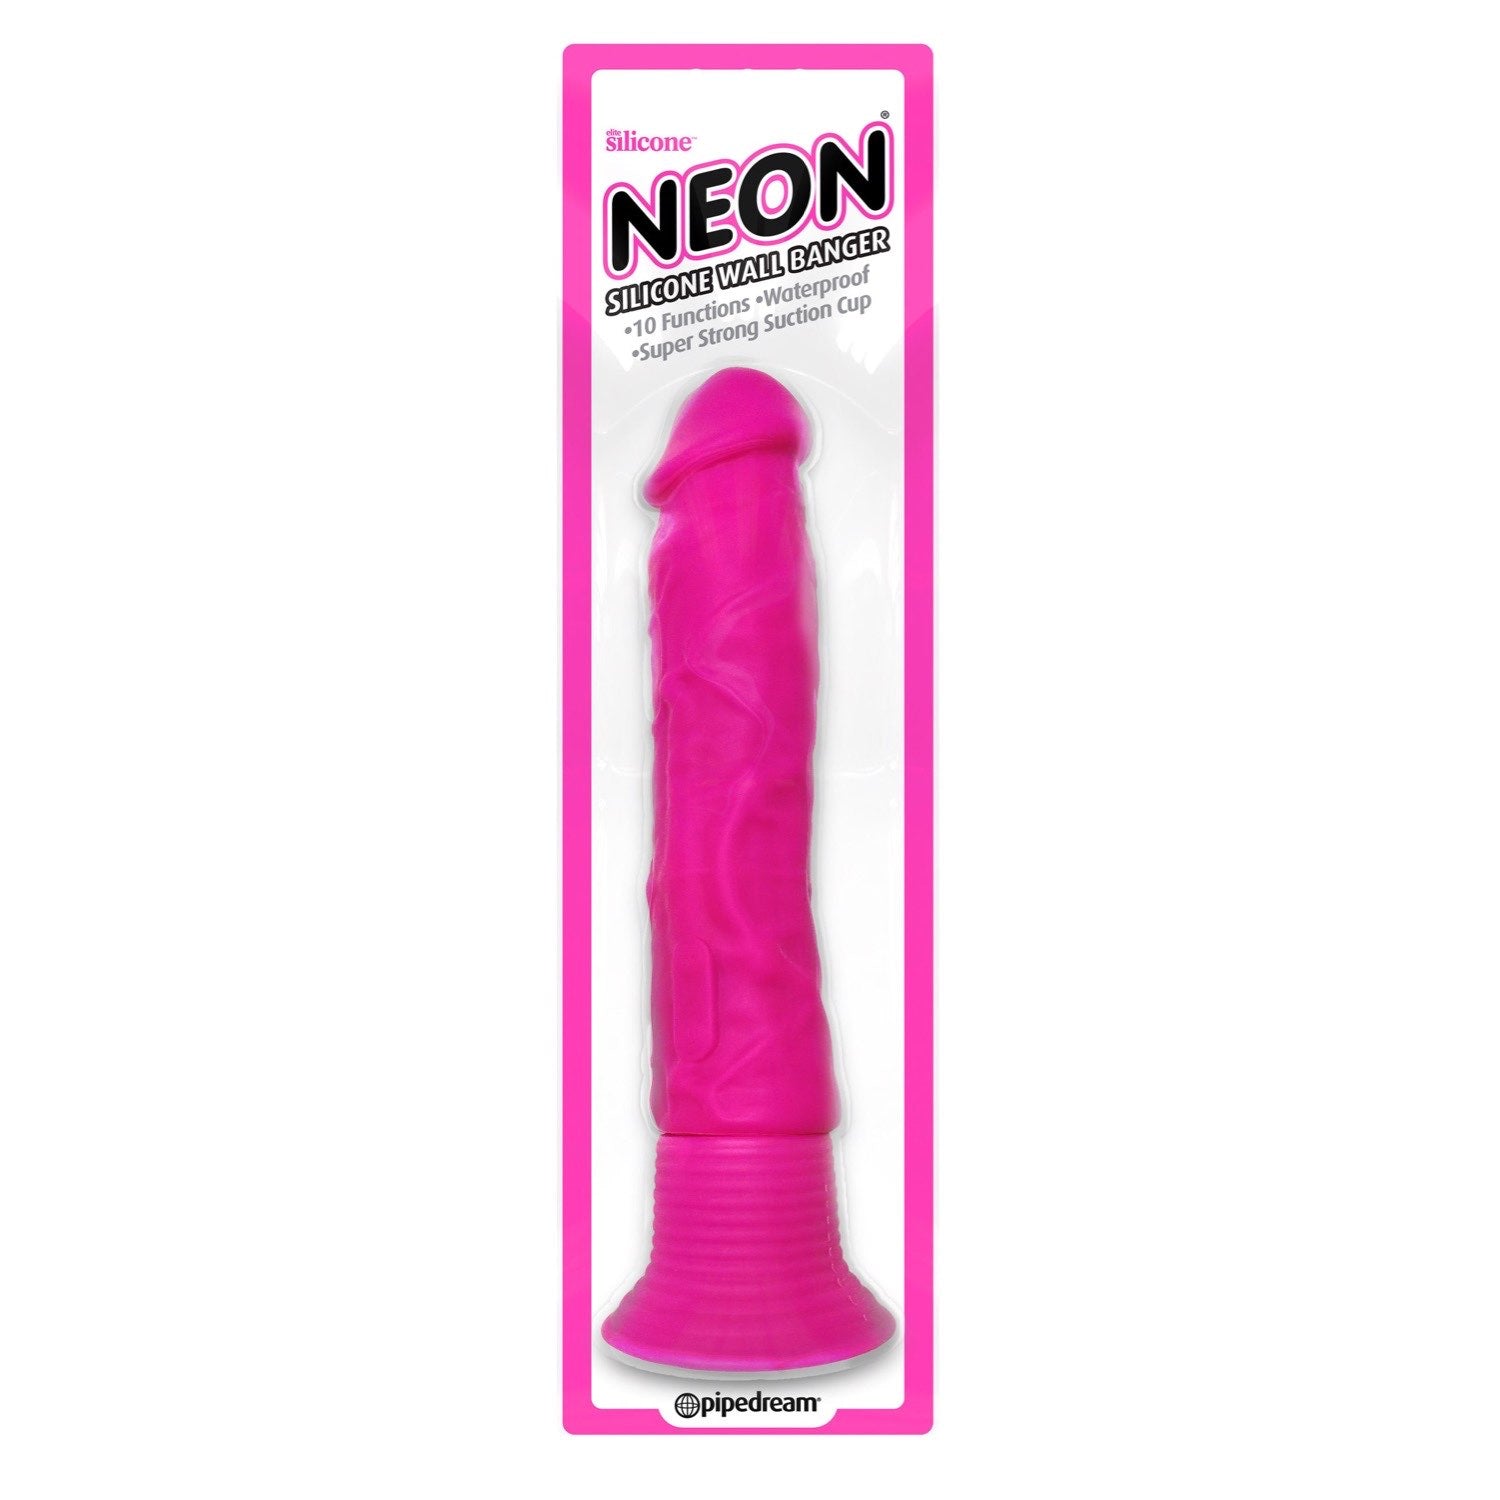 Wall Bangers Neon Silicone Wall Banger - Pink 15.2 cm (6&quot;) Vibrating Dong with Suction Cup Base by Pipedream